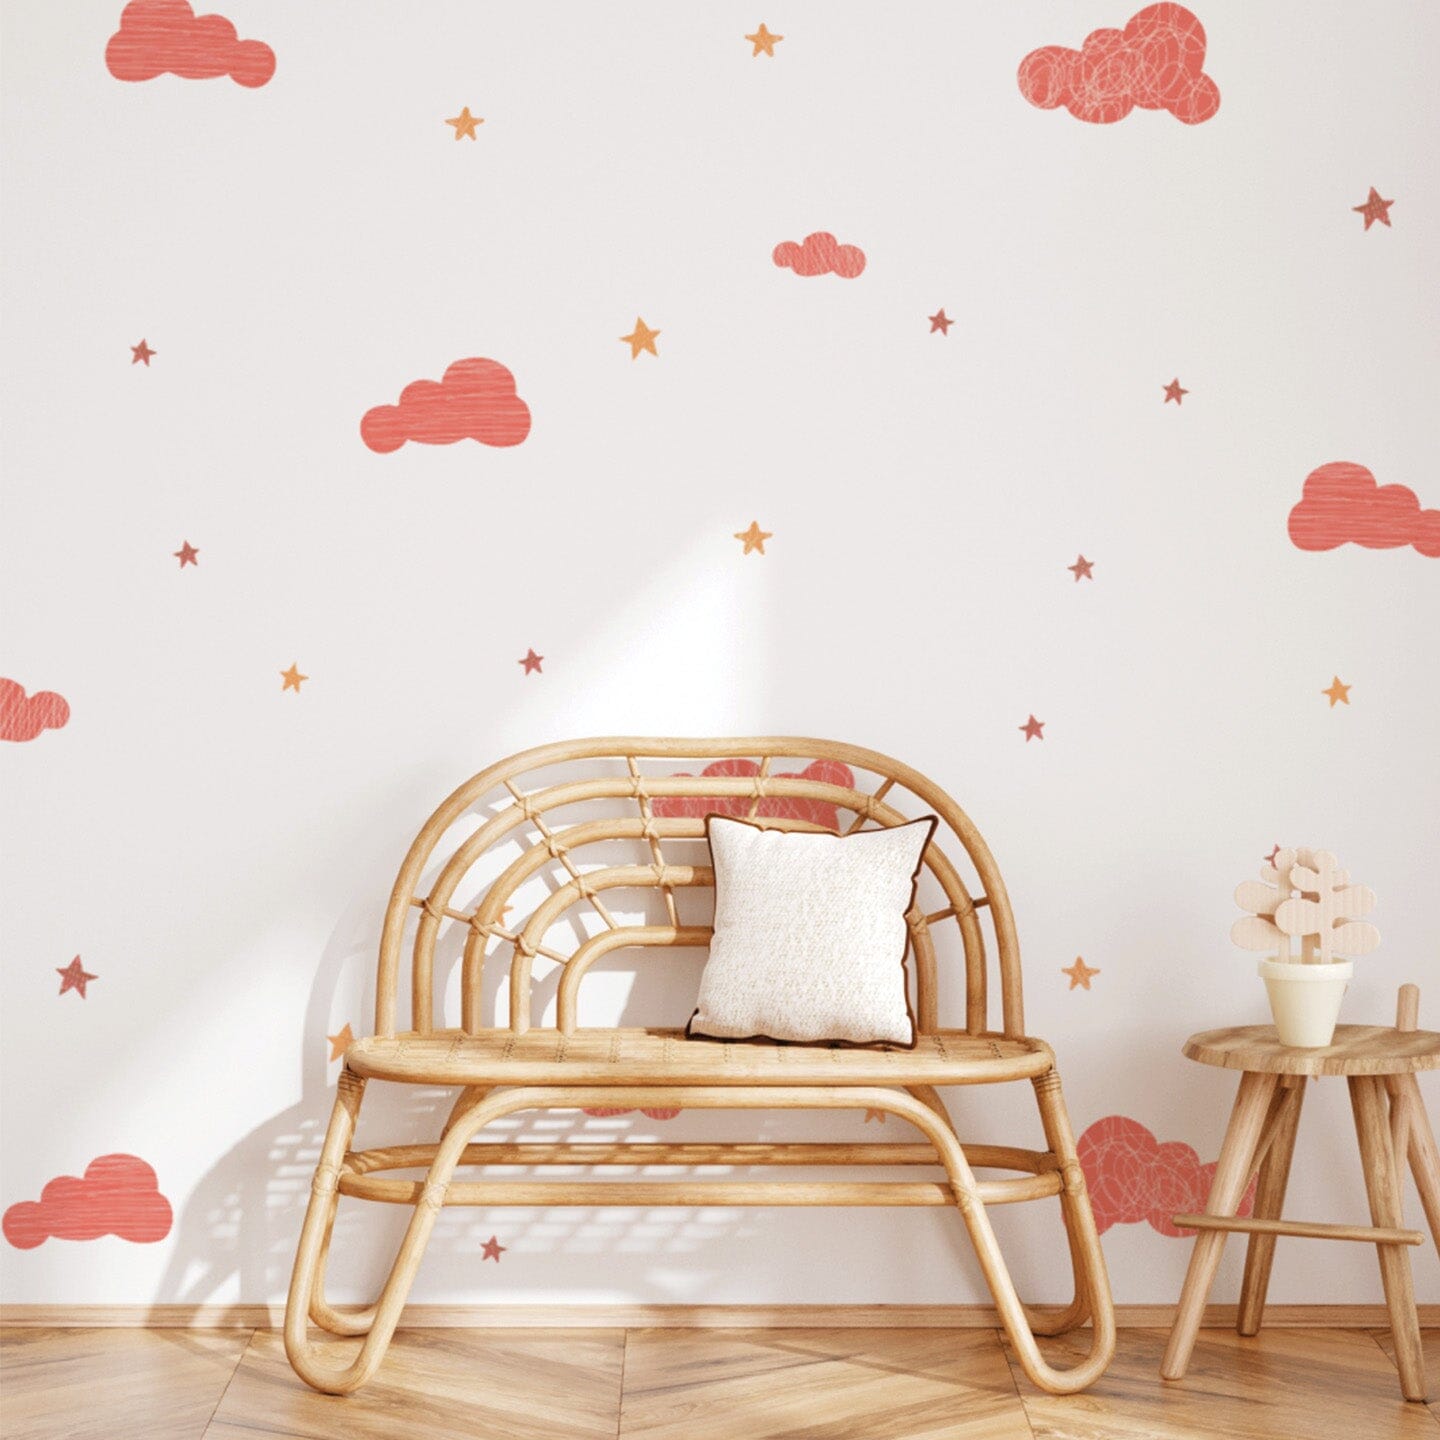 Cloud Wall Decals Decals Urbanwalls Standard Wall Full Order Coral